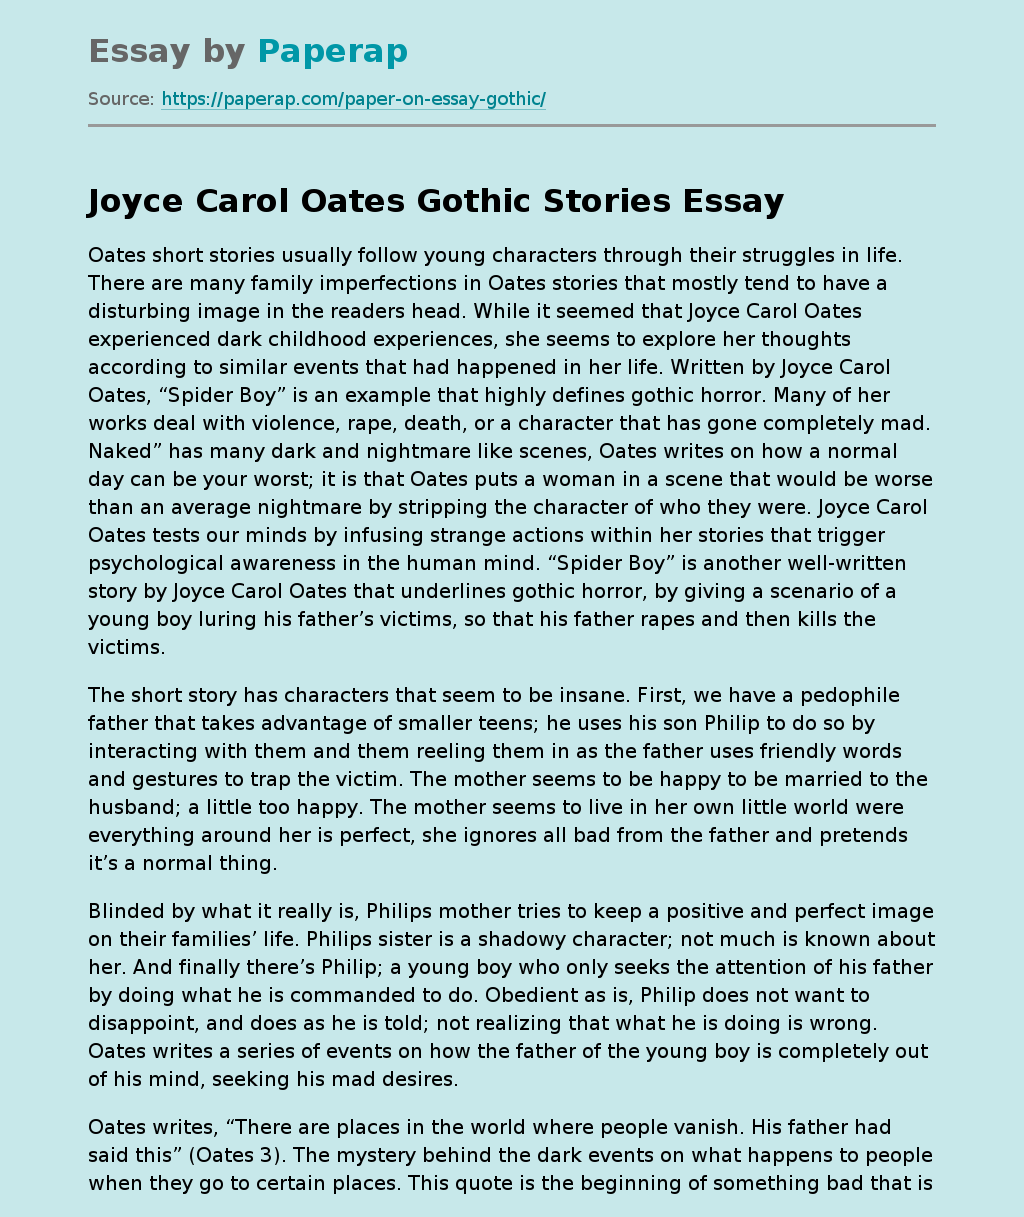 Oates Short Stories of Young Characters